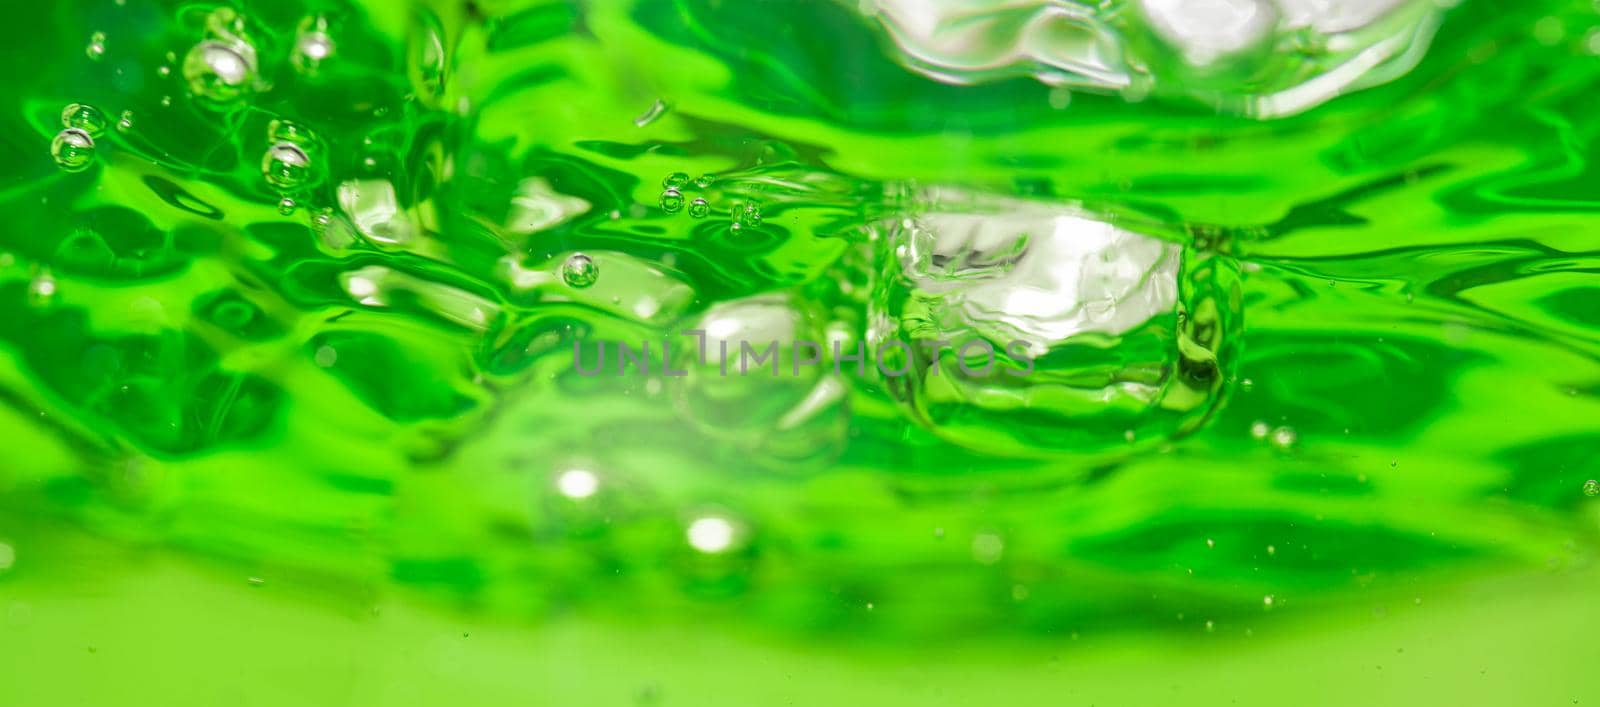 Abstract green water textures for background by Buttus_casso